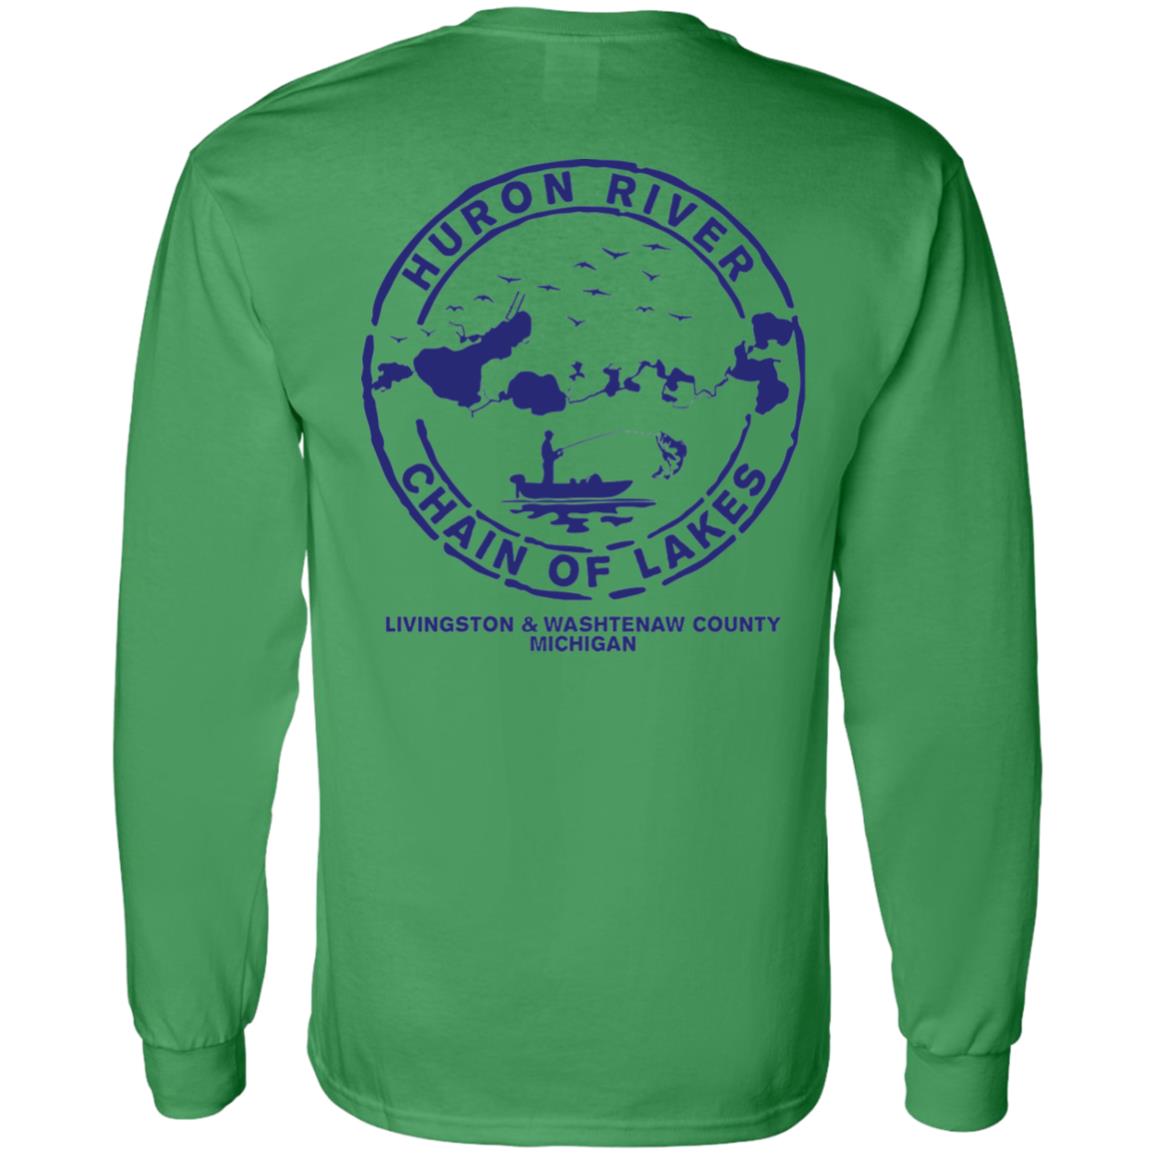 HRCL FL - Navy Boat.... Bust Out Another Thousand - 2 Sided G540 LS T-Shirt 5.3 oz.